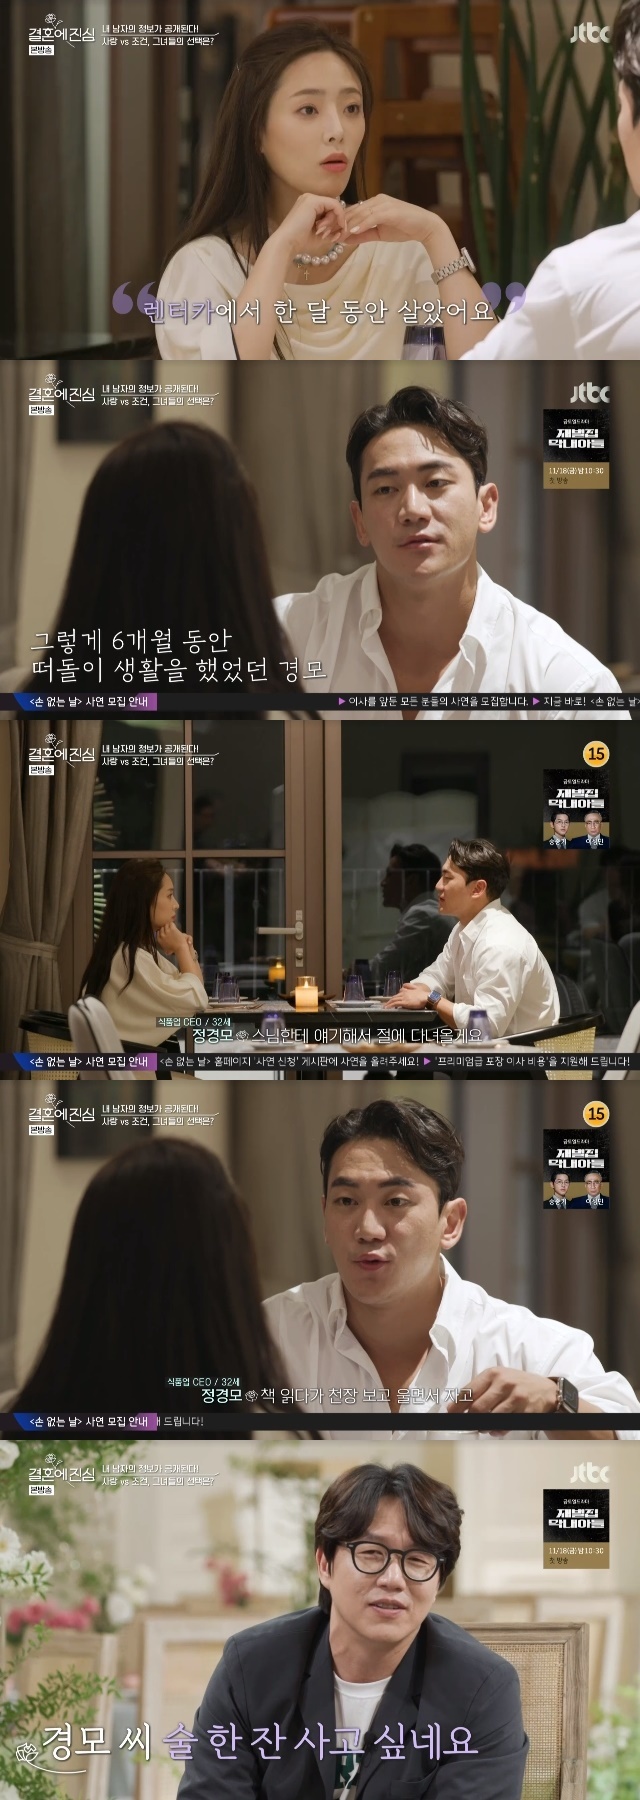 Jung Kyung-mo honestly confessed his business failure.In the third JTBC entertainment Im serious about getting married broadcast on October 27, 10 decisive men and women (Im serious about getting married) who get to know each other through information disclosure date were drawn.On this day, Jung Kyung-mo said that his current job is a food business CEO who runs a rice cake online business. I earn a lot in a month. I earn well.Before the rice cake business, I had a pork rib restaurant and a wine bar business, he said. The meat restaurant was my first business. It was so great. It was a big hit, so I thought I could do business. I was proud for a year. I ran out of customers because of the burnout.He said he was completely screwed with the meat restaurant business. I lived in a rental car for a month because I did not want to spread my debts to my parents. I spent six months. I said, Dad, Ill talk to my monk and go to the temple.I pushed my head, ate lunch 300 times, ate dinner 300 times. I read a book in the evening and cried while sleeping. 